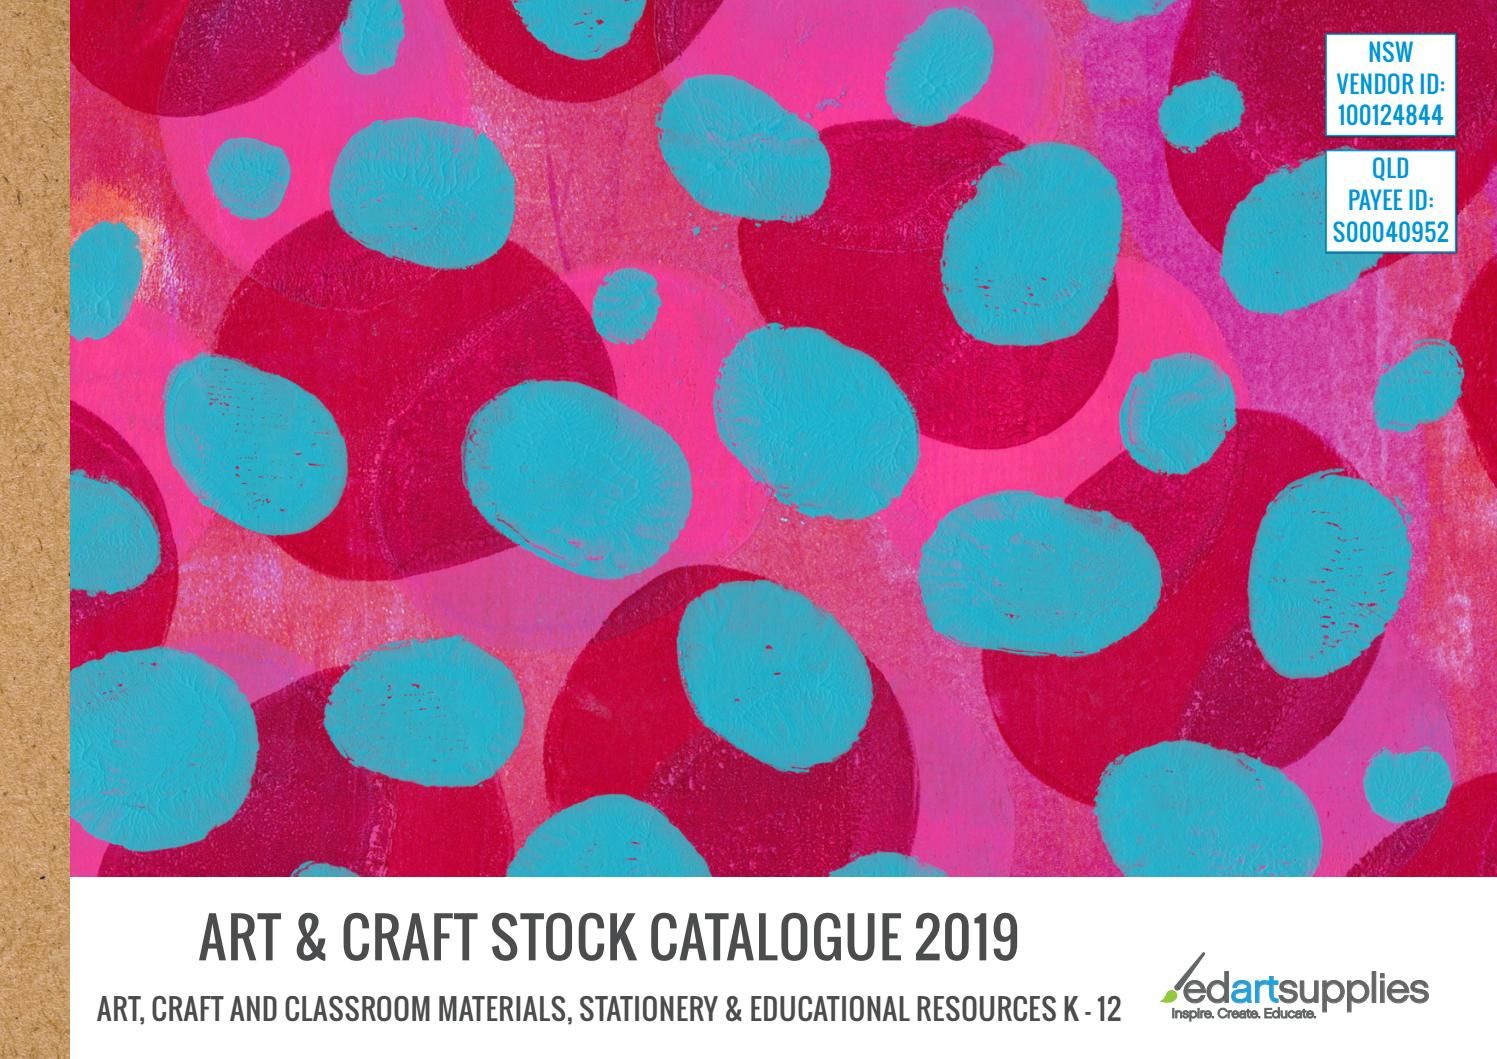 Ed Art Supplies Art & Craft Stock Catalogue 2019 Within Recent Blended Fabric Mod Dinosaur 3 Piece Wall Hangings Set (View 20 of 20)